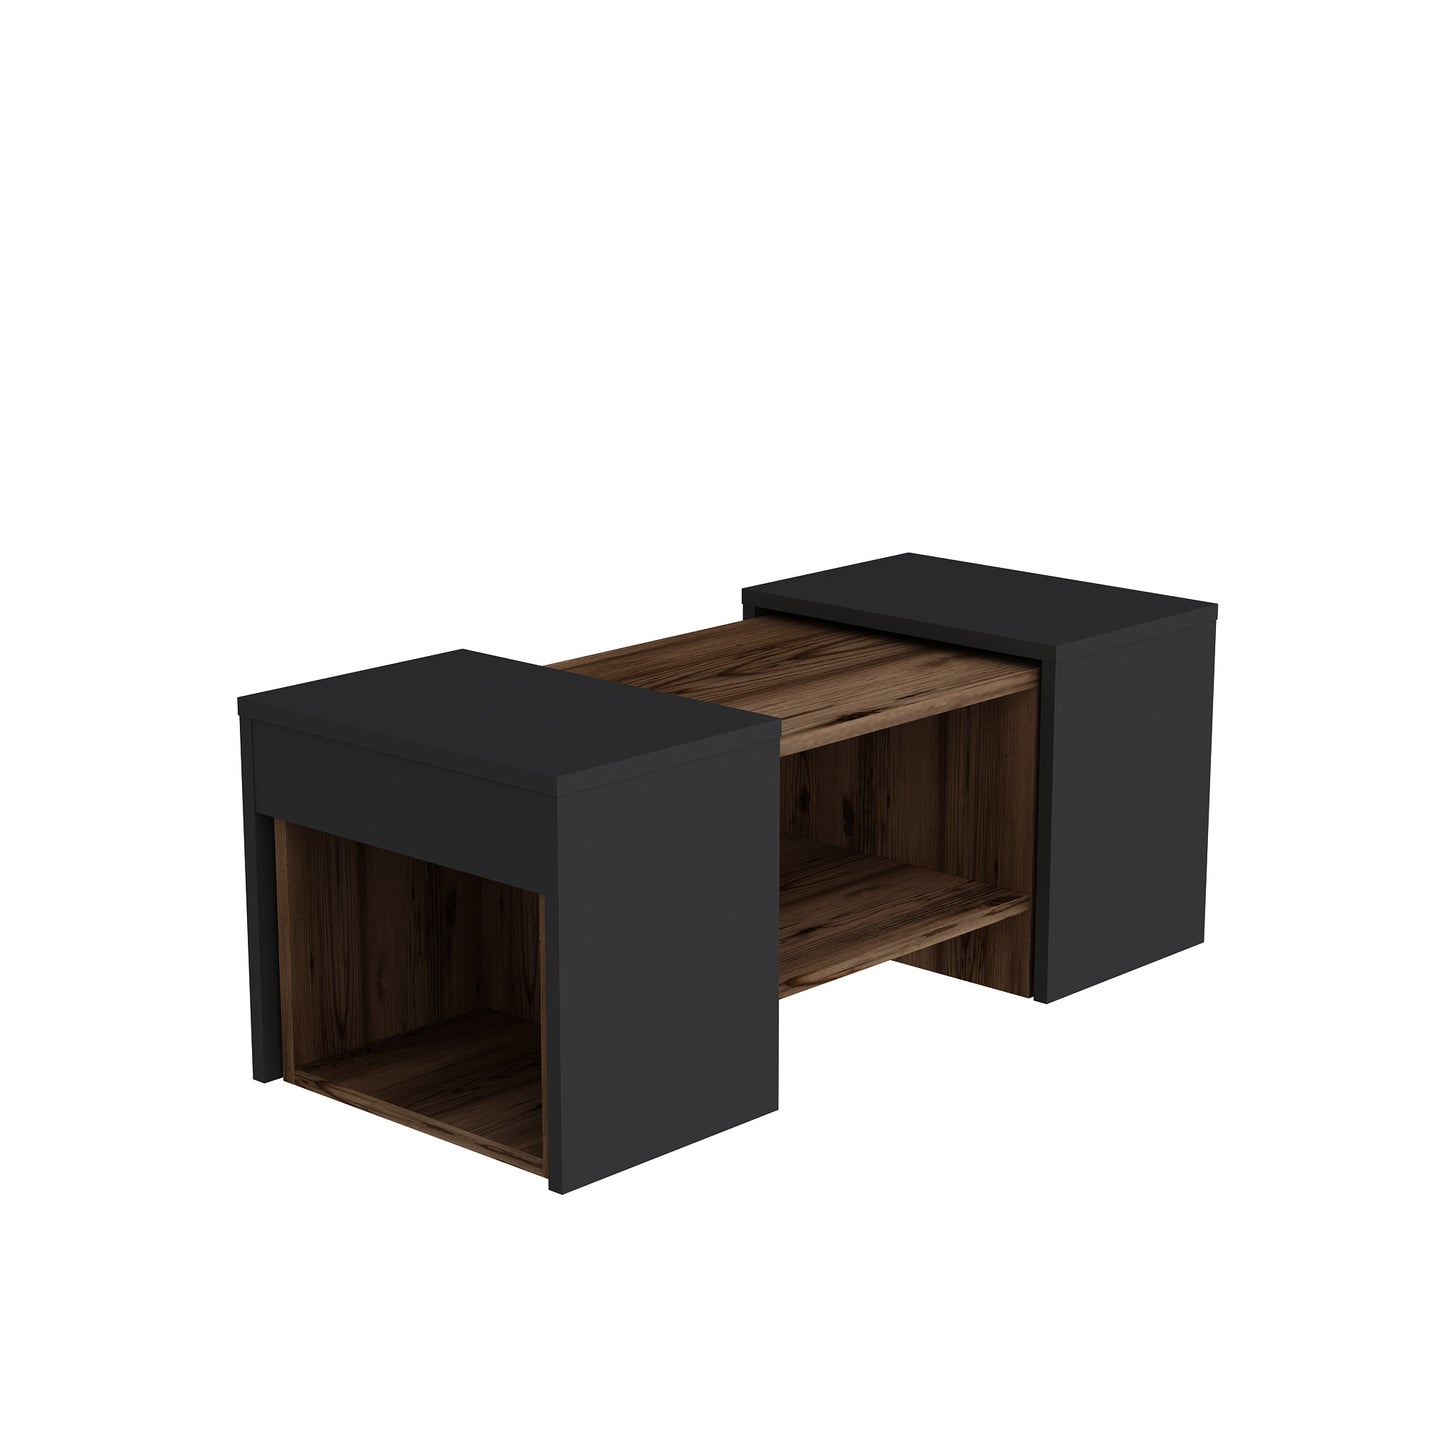 Nesting Coffee Table with Storage Shelves (Set of 3) Irene